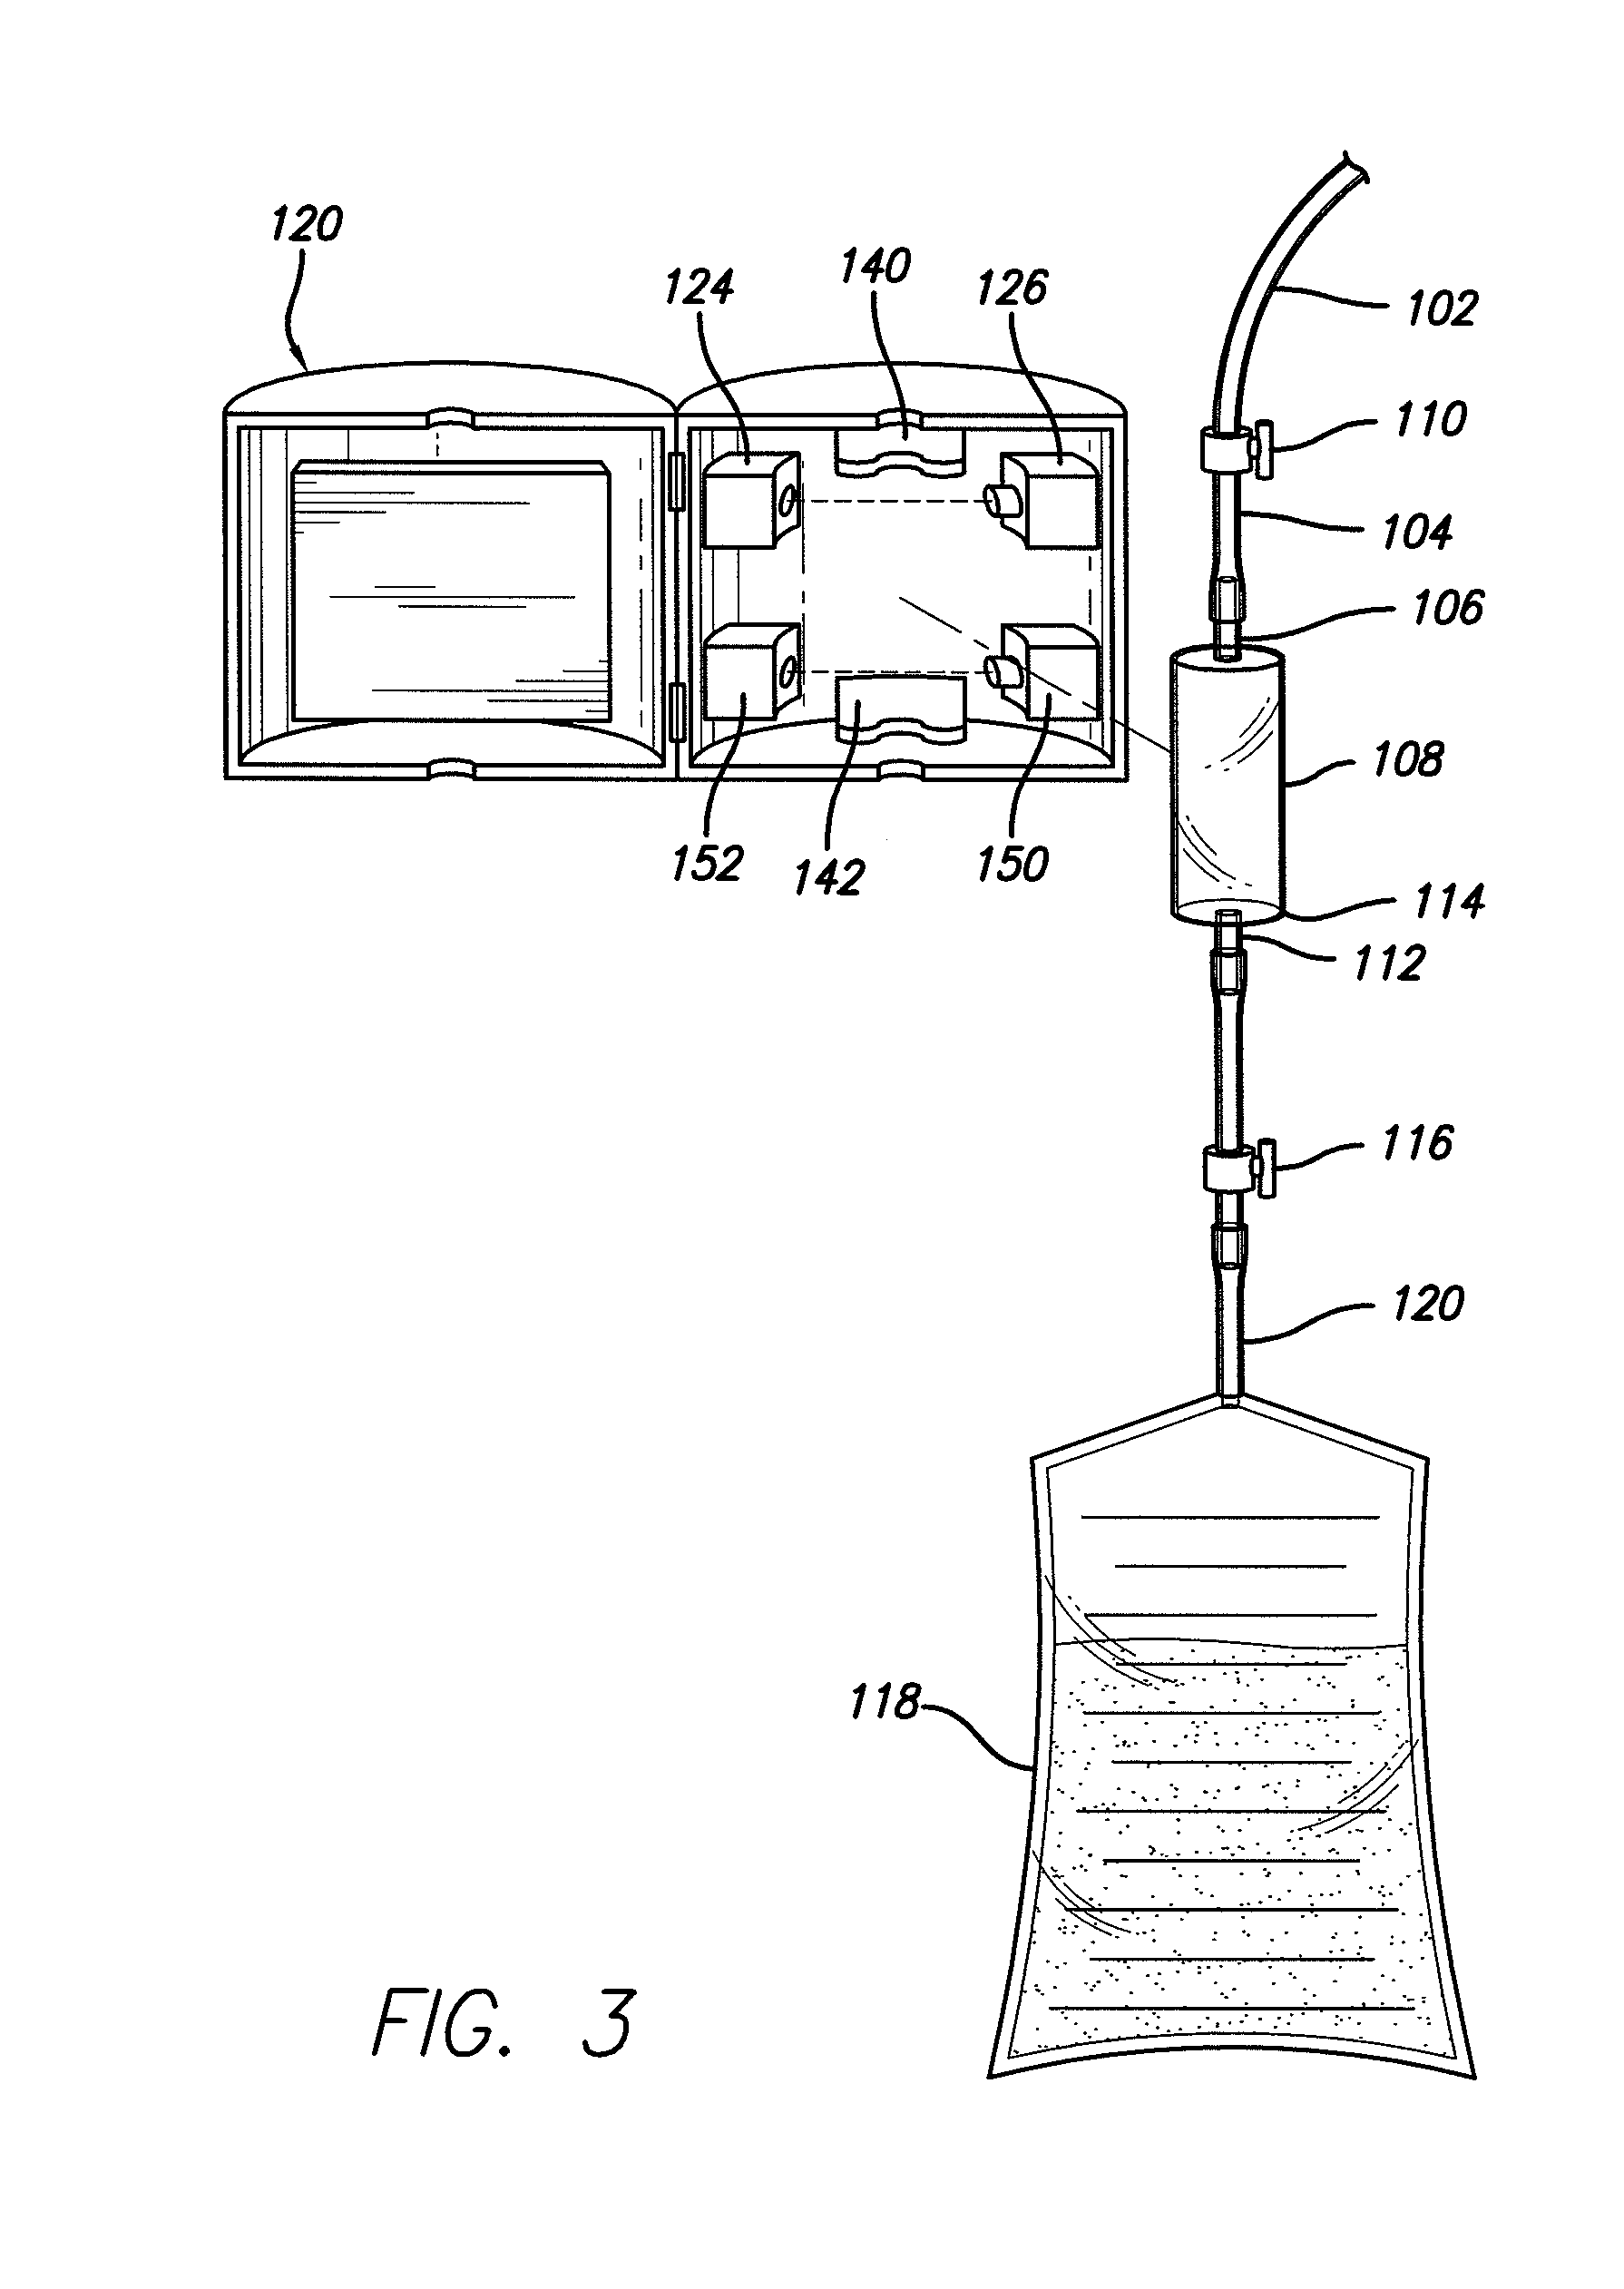 Automated body fluid drain control apparatus and method